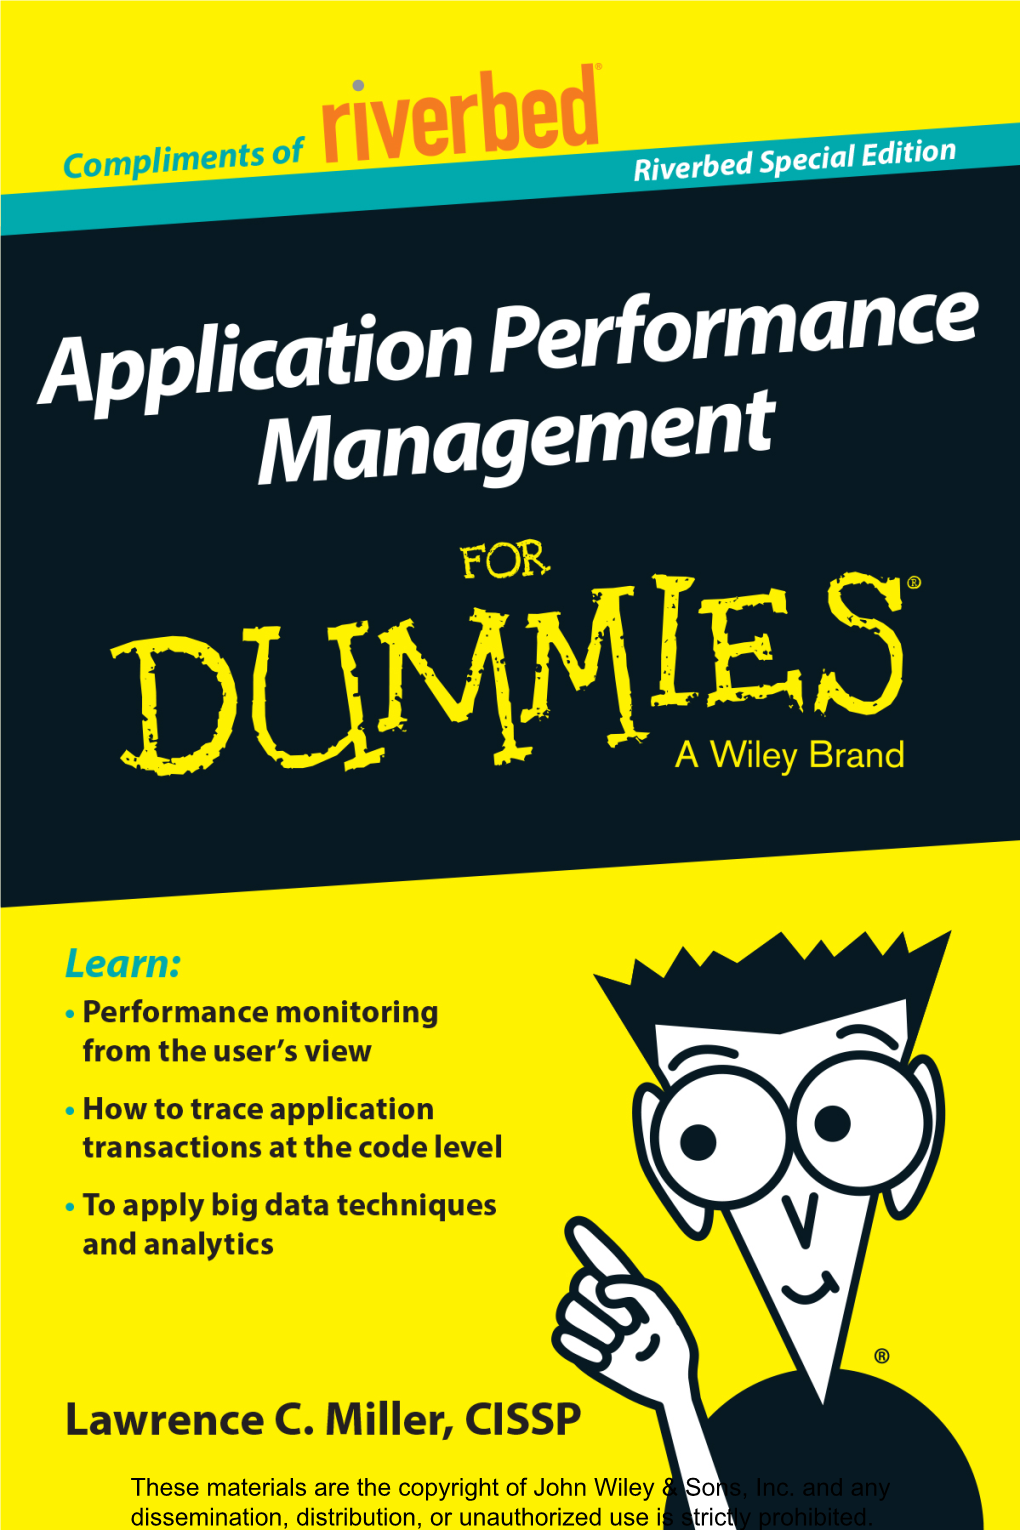 Application Performance Management for Dummies®, Riverbed Special Edition Published by John Wiley & Sons, Inc